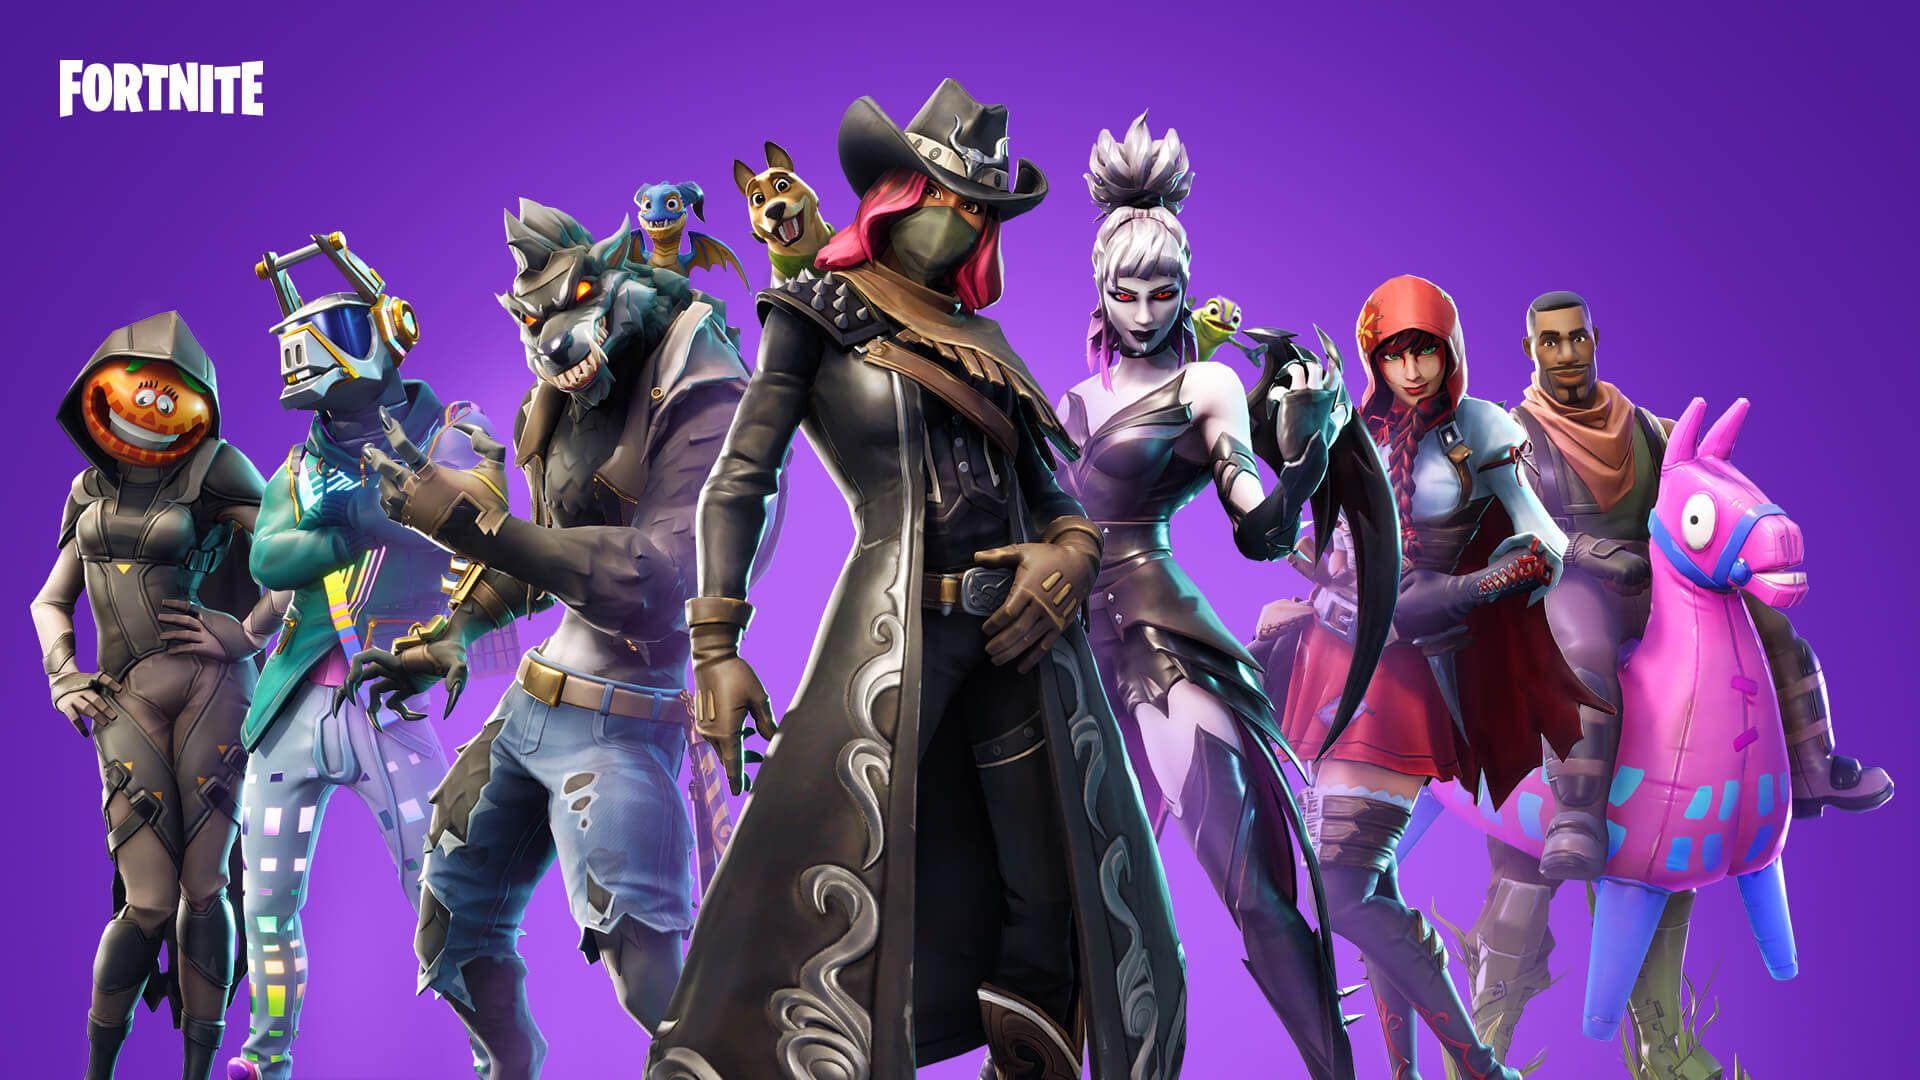 Fortnite Fans Using Giddy Up And Standard Skins Surprised A Clueless